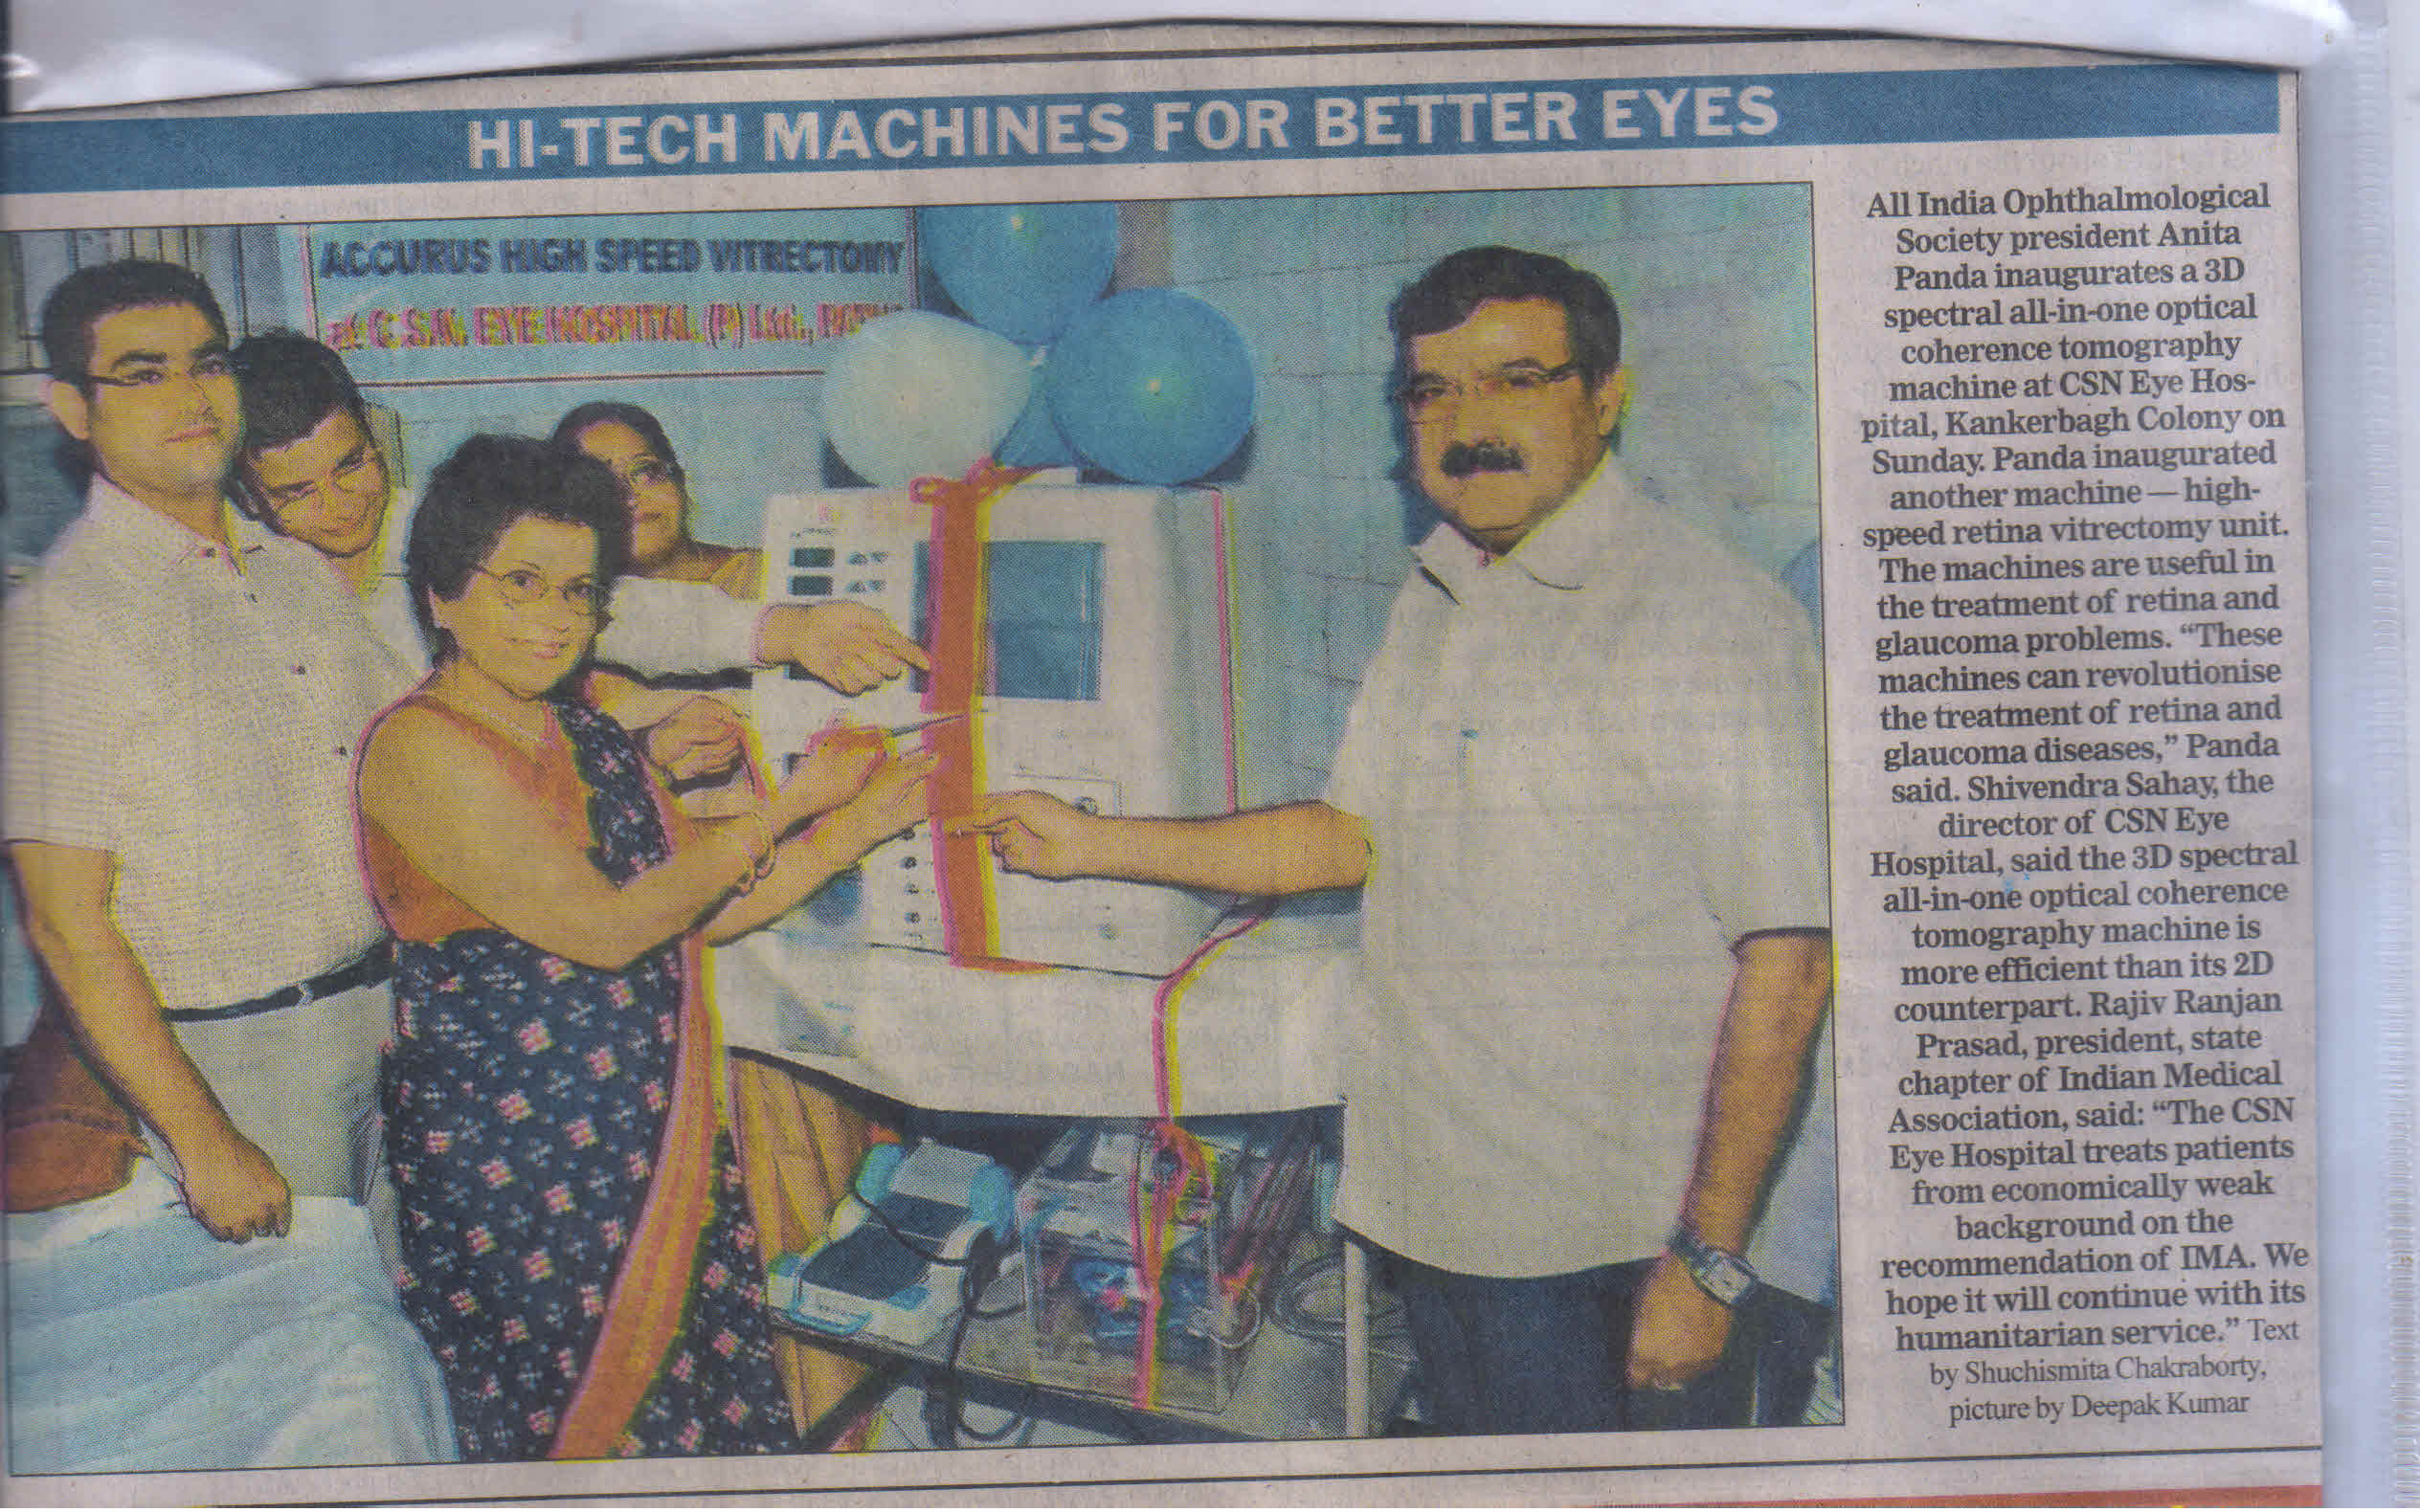 In News for Inauguration of 1st Alcon's Accurus 400 Vitrectomy Unit in Bihar by Prof. Anita Panda